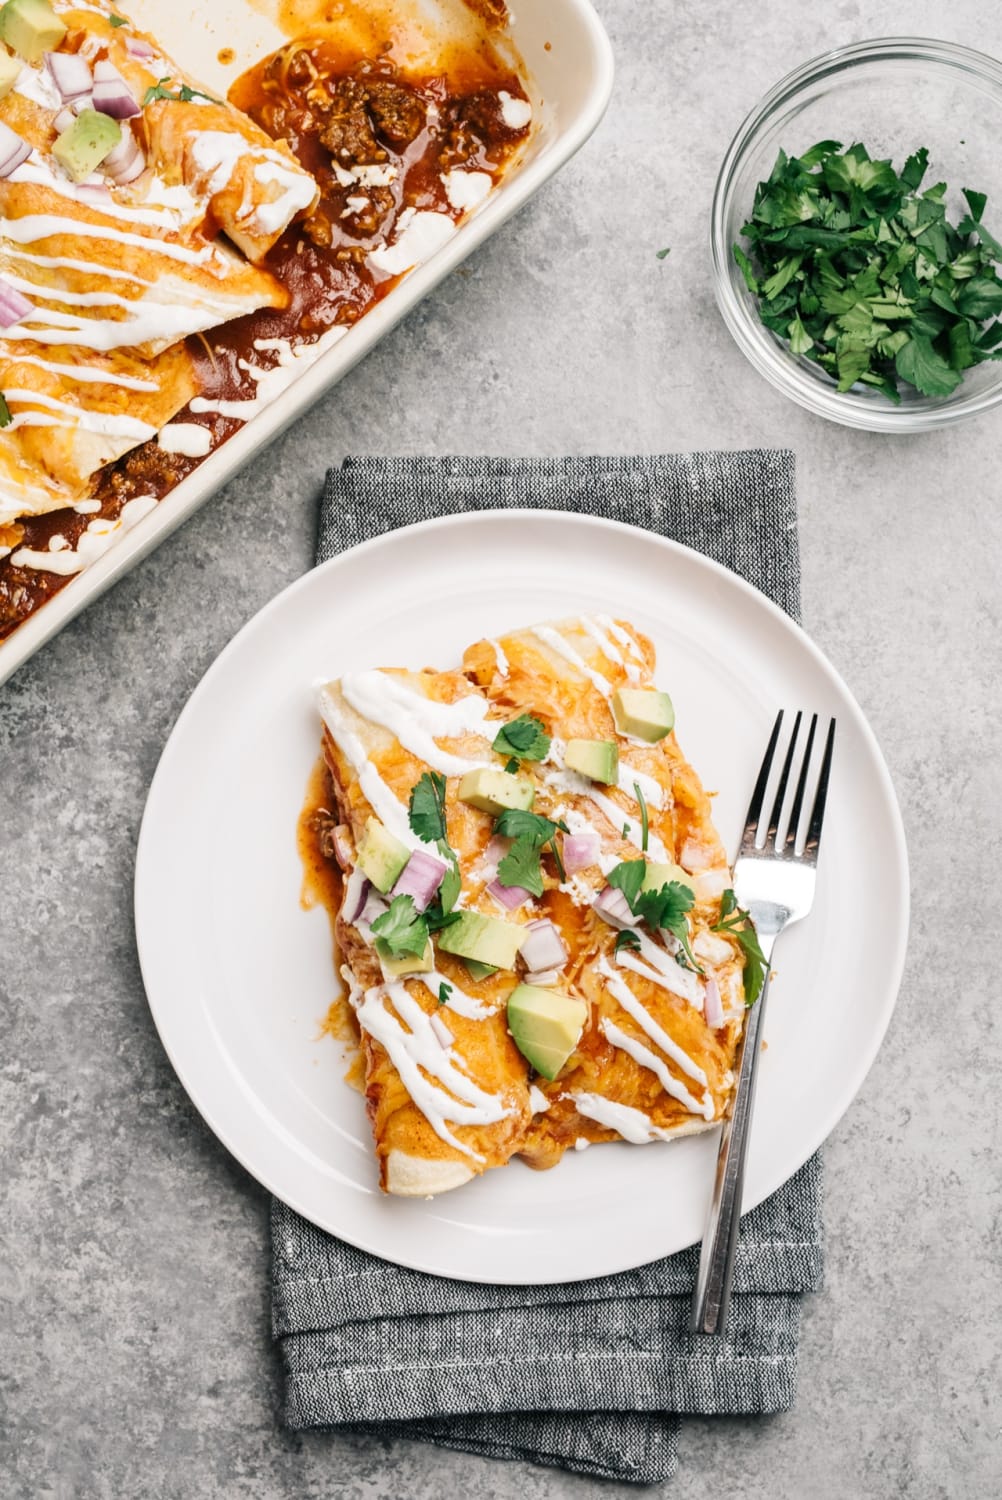 This easy beef enchiladas recipe is sure to become a family favorite!